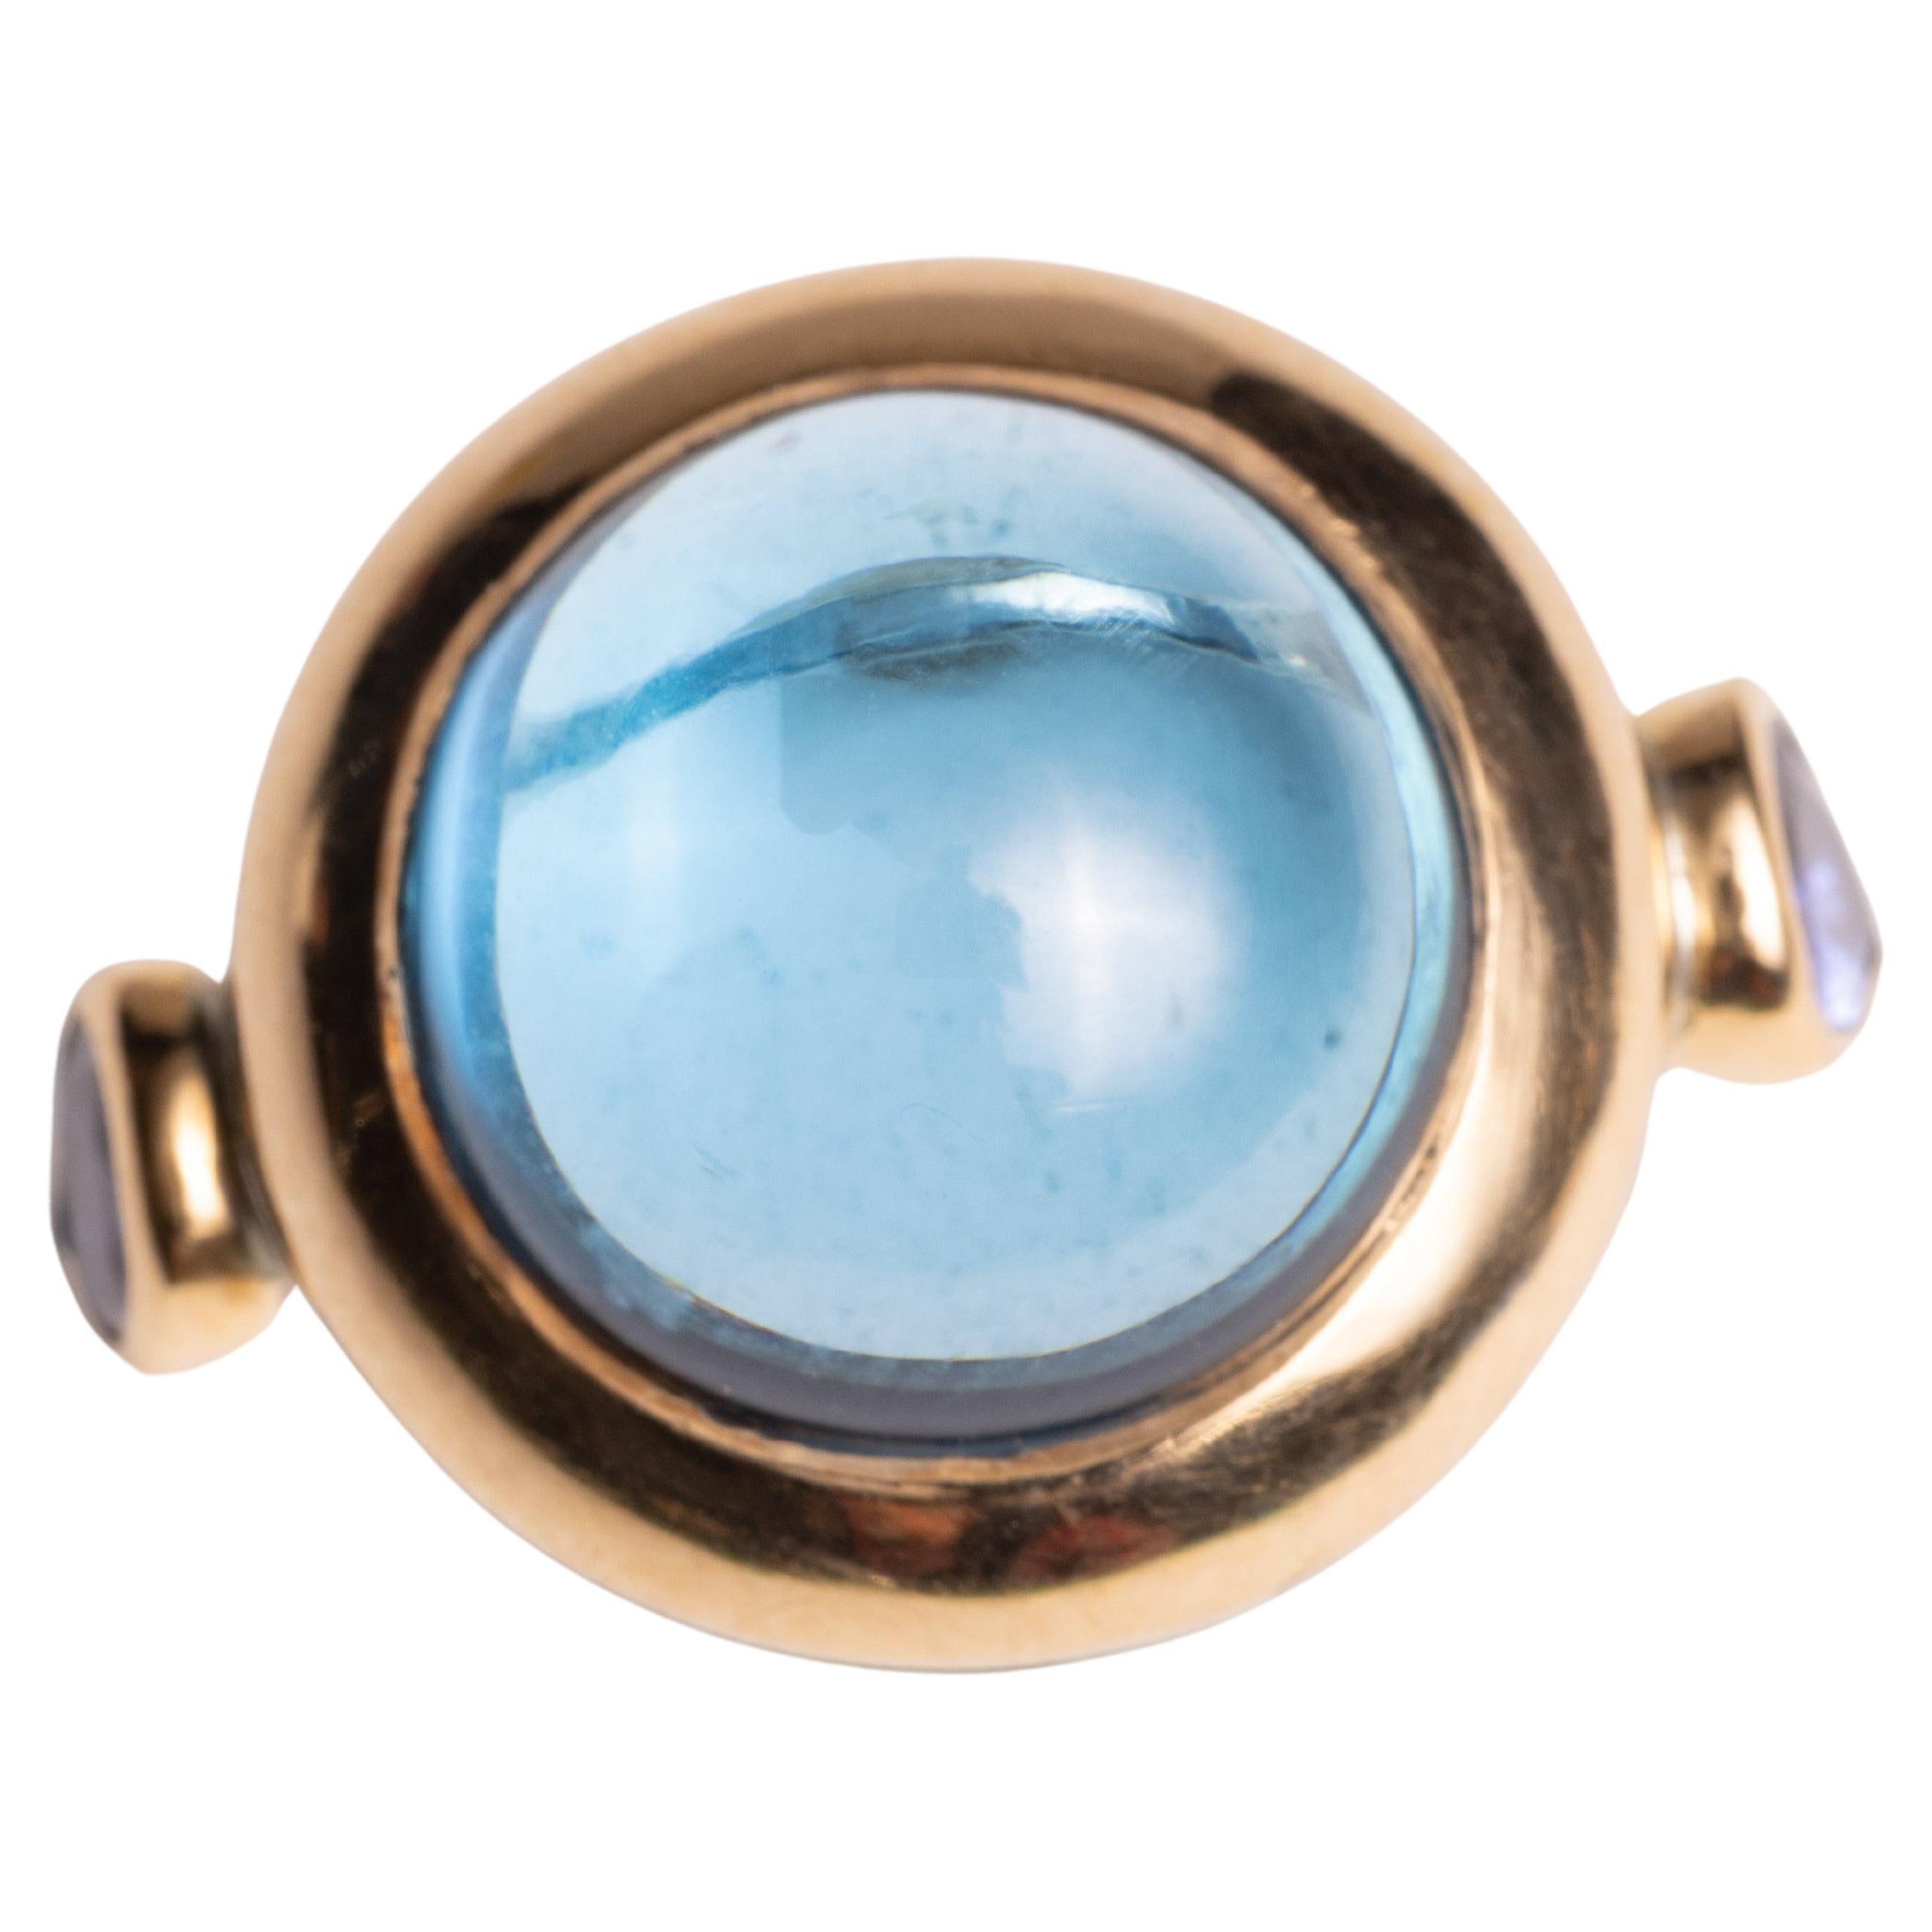 A large round cabochon blue topaz gemstone ring with two faceted, pear-shaped tanzanite stones on the side.  18K gold over sterling (not a plated gold).  Ring size is 7.25.

The fine jewelry collection is sourced, designed or created by Deborah